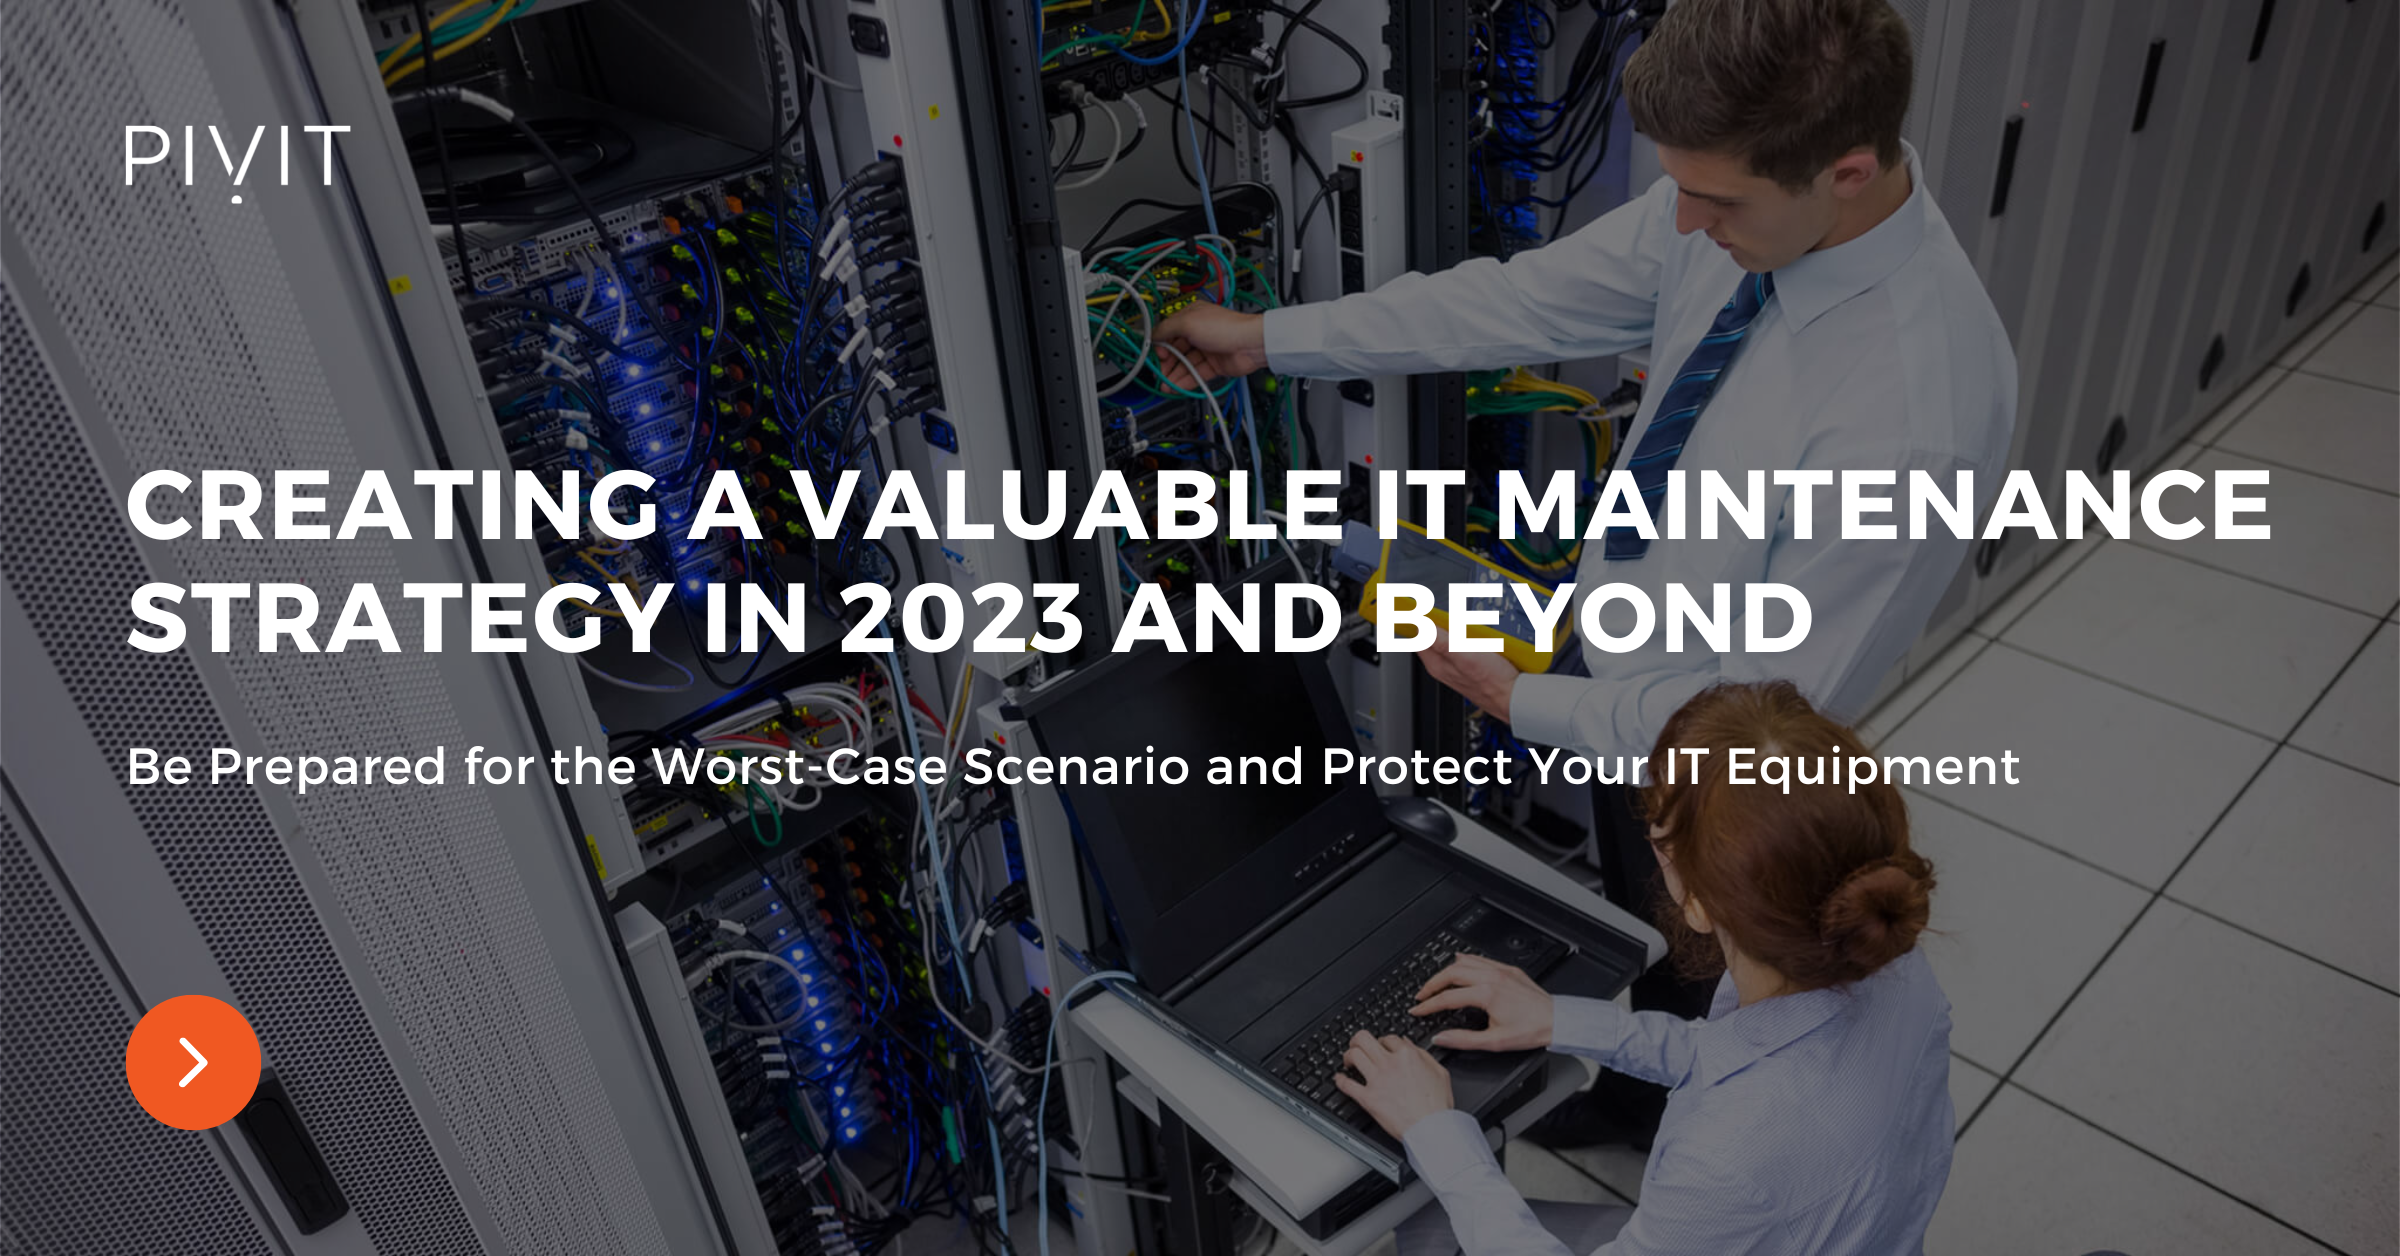 Creating a Valuable IT Maintenance Strategy in 2023 and Beyond